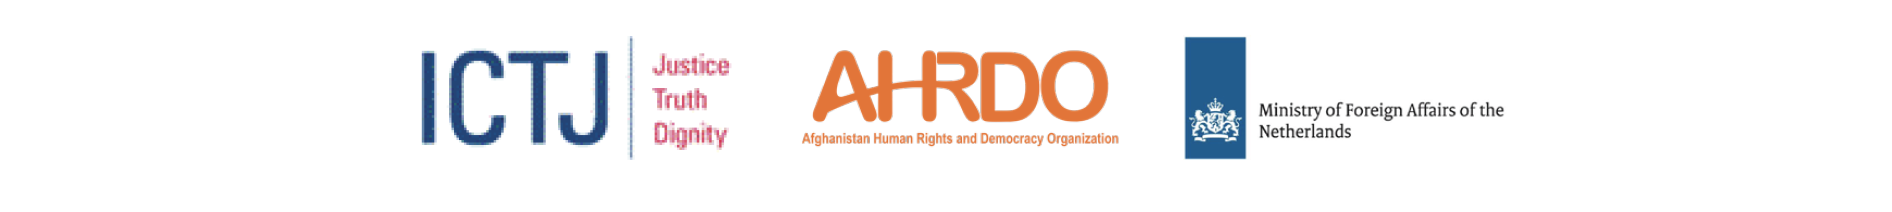 The logos of ICTJ, AHRDO, and the government of the Netherlands